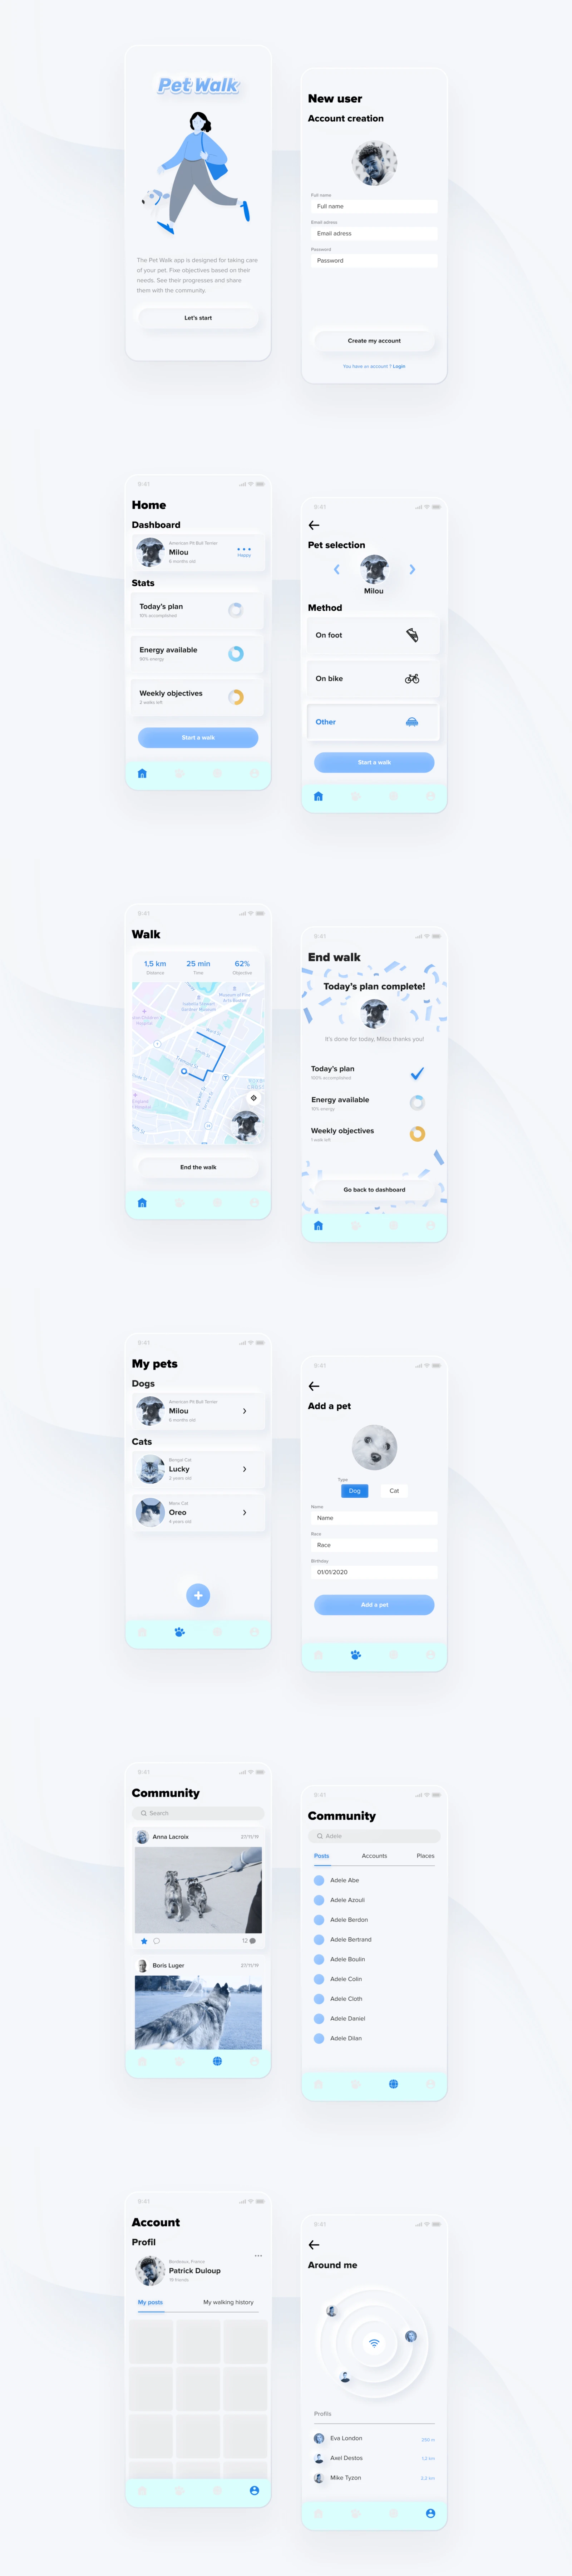 Pet Walk App UI Kit for Figma - It is an application dedicated to your pets: monitor their health, share their progress with the community and improve their lives. The kit is free for personal projects. 12 screens for you to get started.